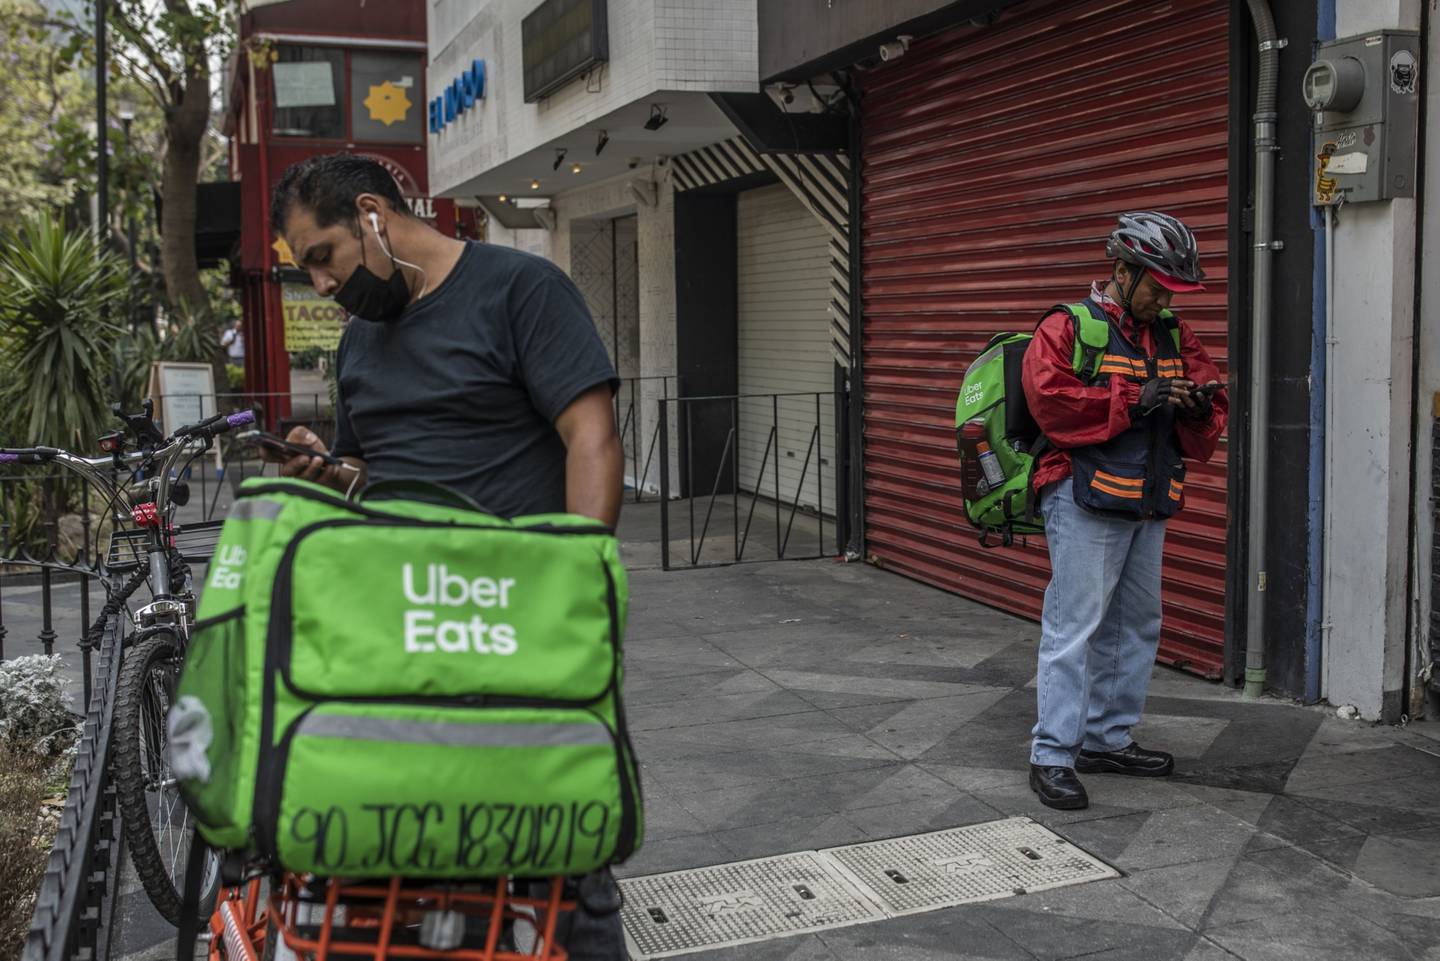 In Brazil, Uber Eats will only deliver meals until March 7, but the U.S. company will maintain other delivery services